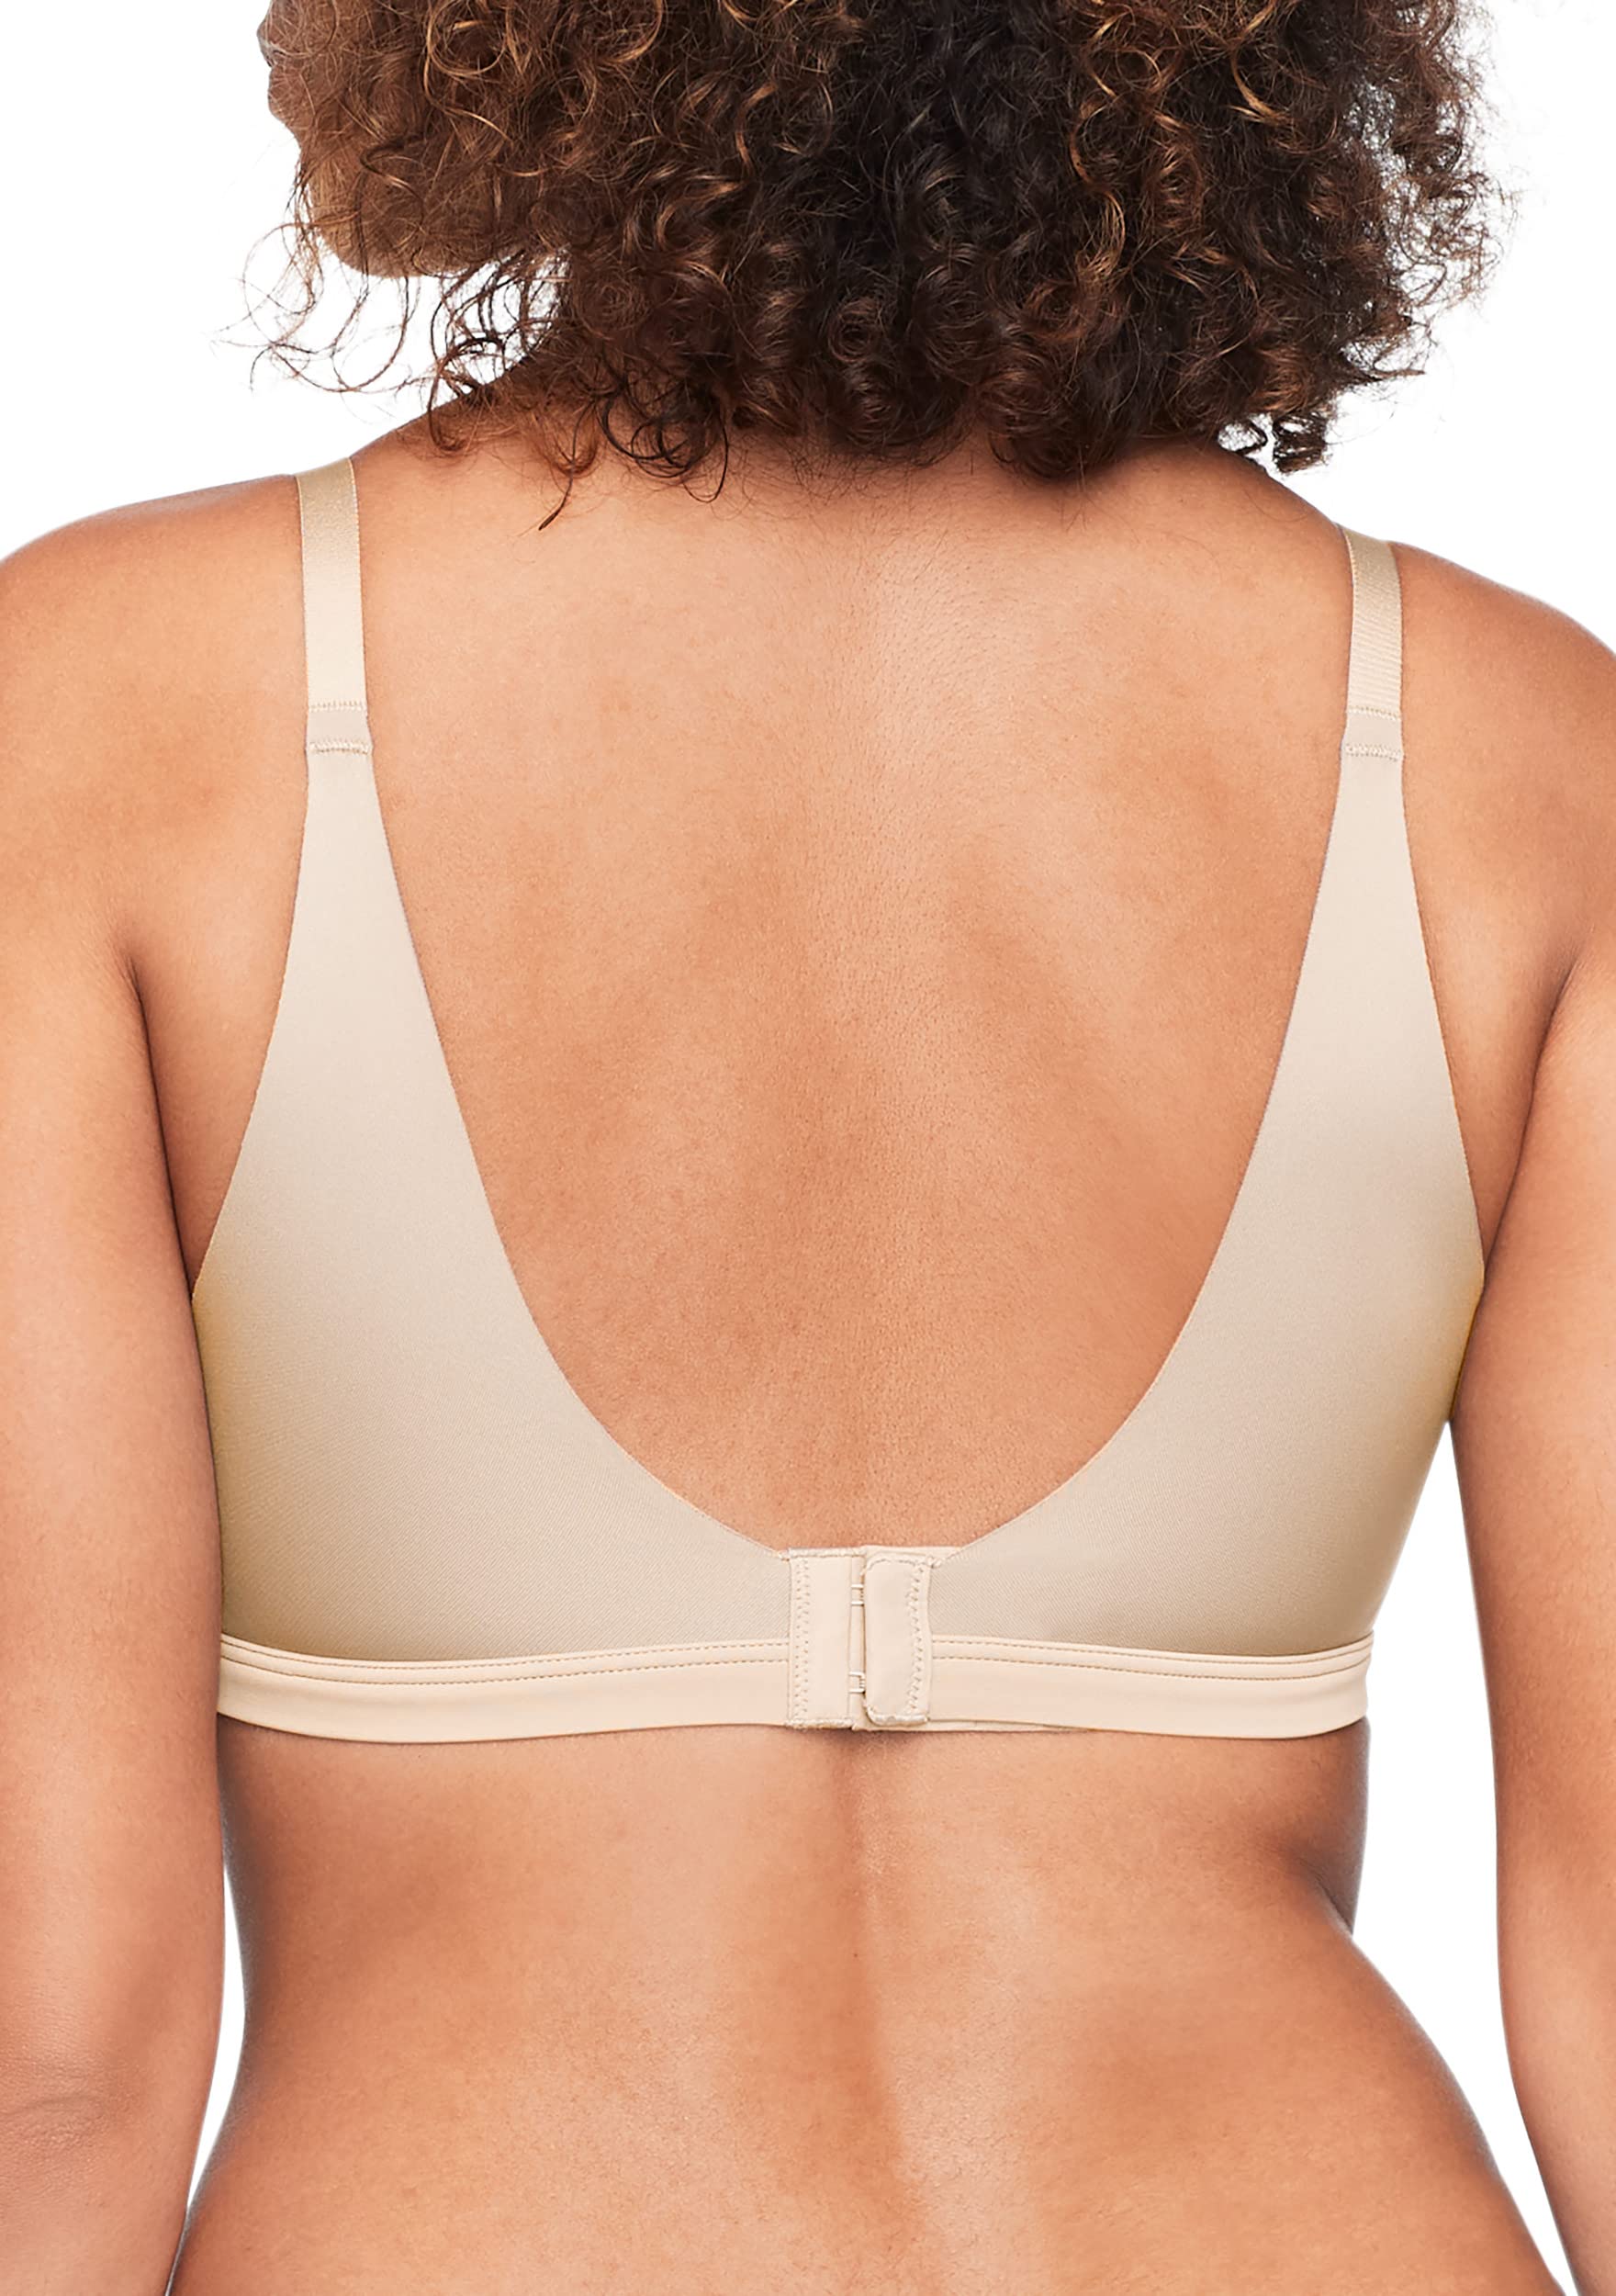 Warner's Women's No Side Effects Underarm and Back-Smoothing Comfort Wireless Lift T-Shirt Bra Rn2231a